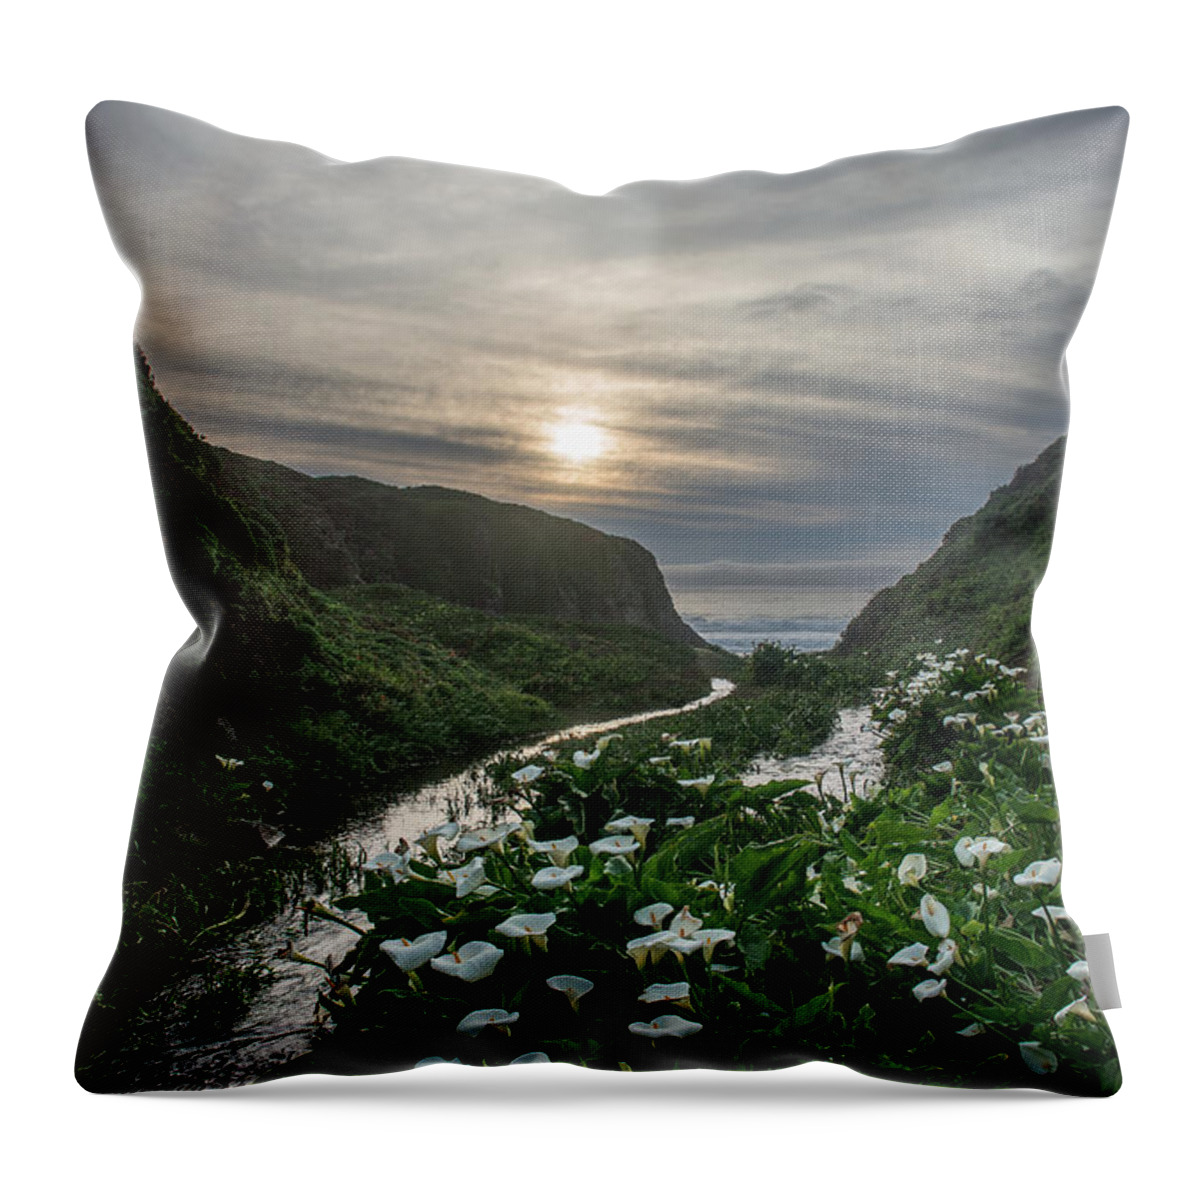 Big Sur Throw Pillow featuring the photograph Lilies Of Garrapata by Bill Roberts